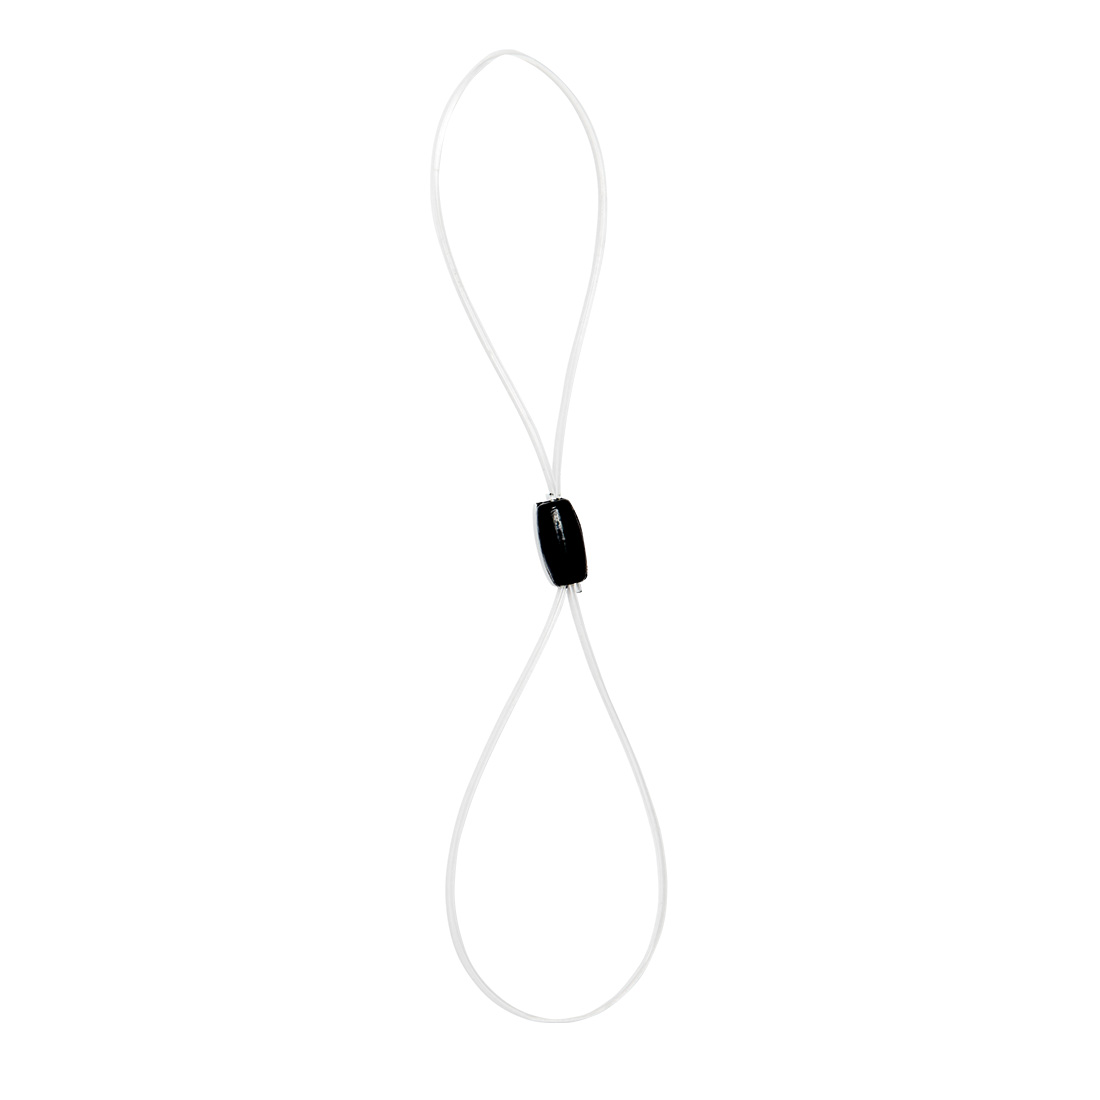 Shop Cochlear Safety Line (Short Double Loop) | Cochlear Americas